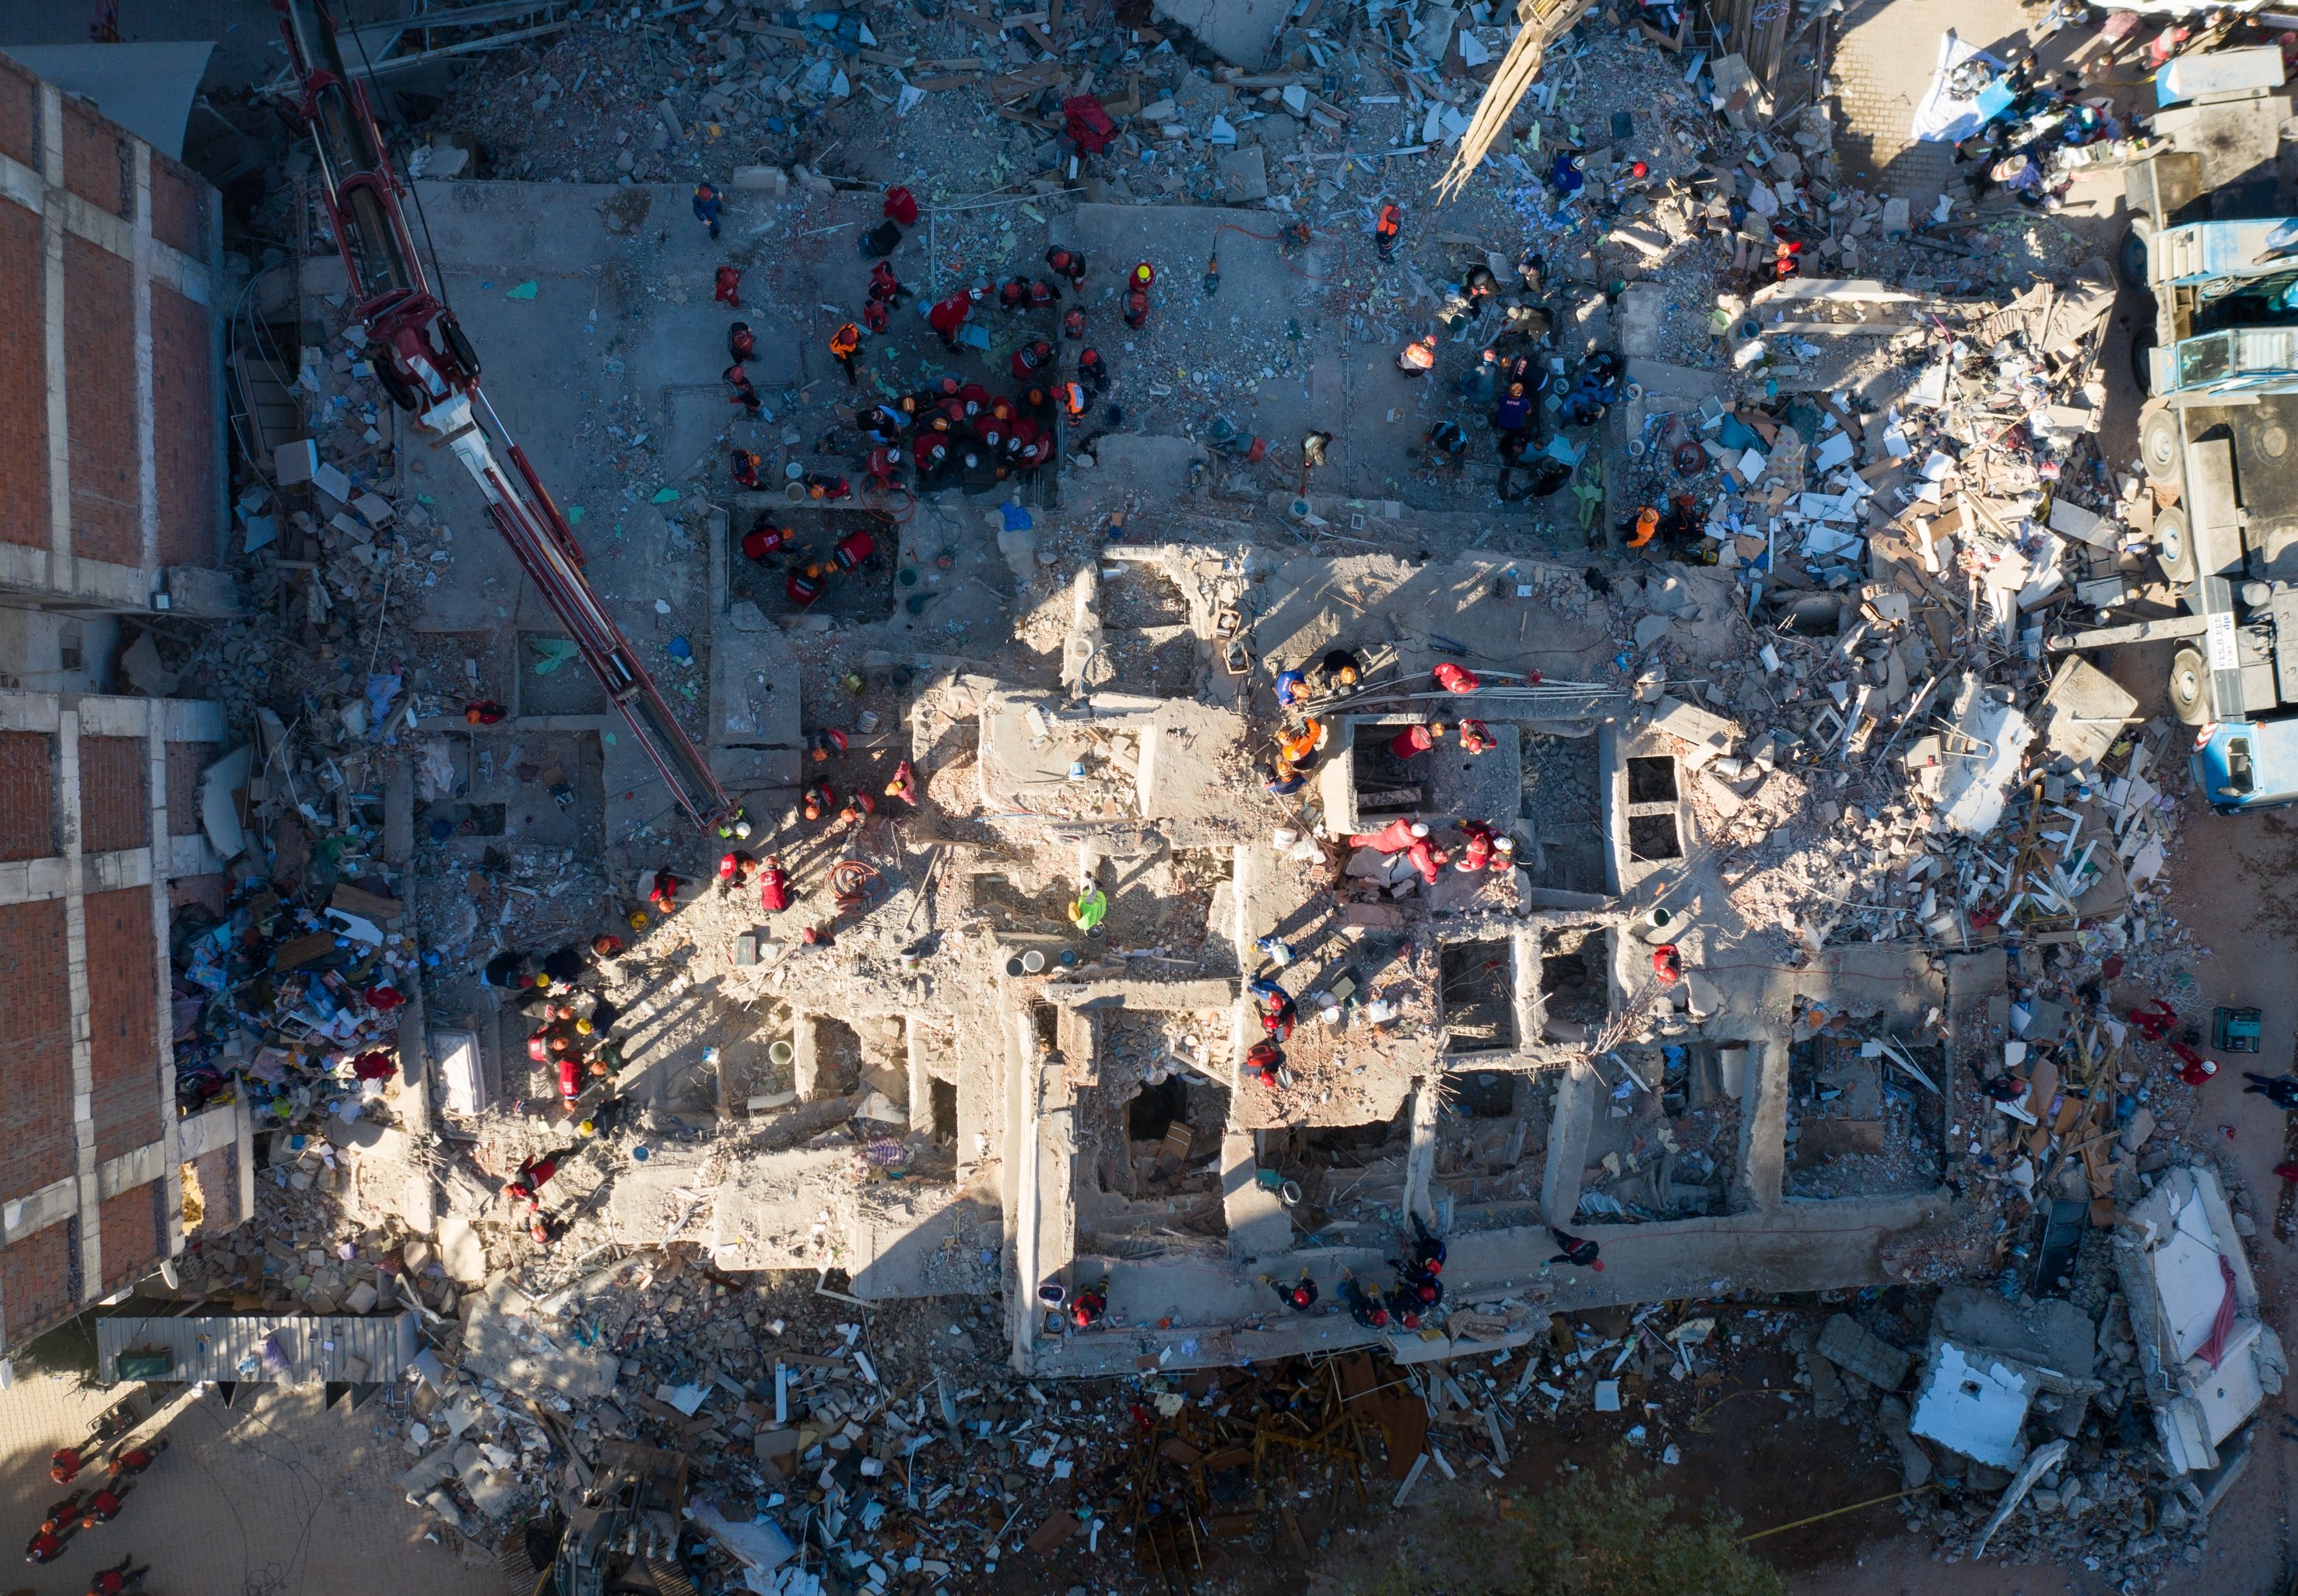 Rescue teams sort through concrete blocs and debris of collapsed buildings in Bornova, Izmir in search of survivors of the powerful earthquake, Nov. 1, 2020. (AA Photo)